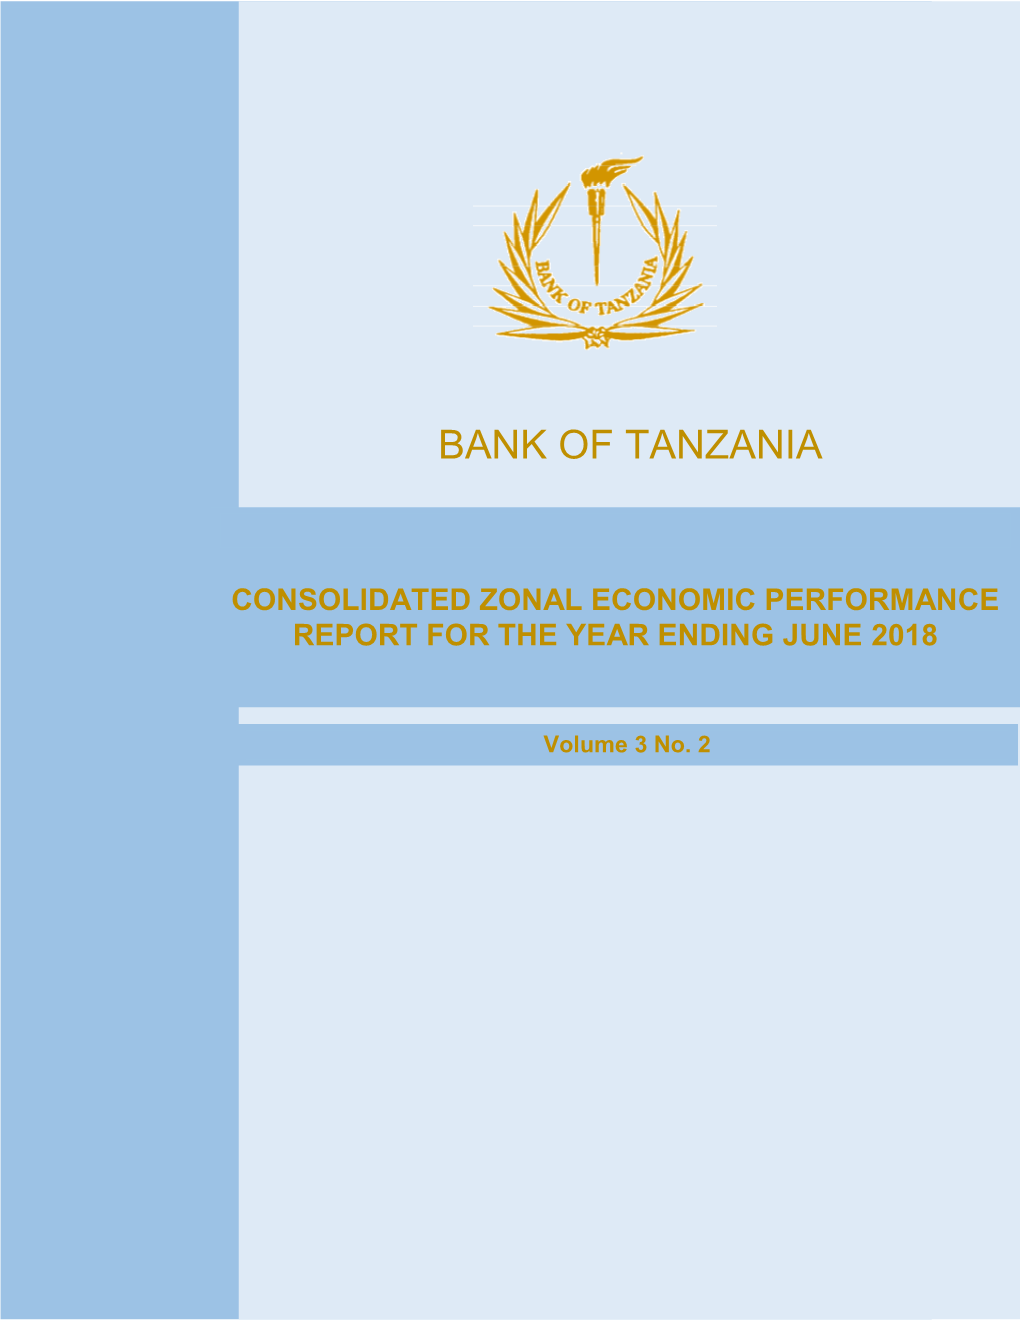 Consolidated Zonal Economic Performance Report for the Year Ending June 2018